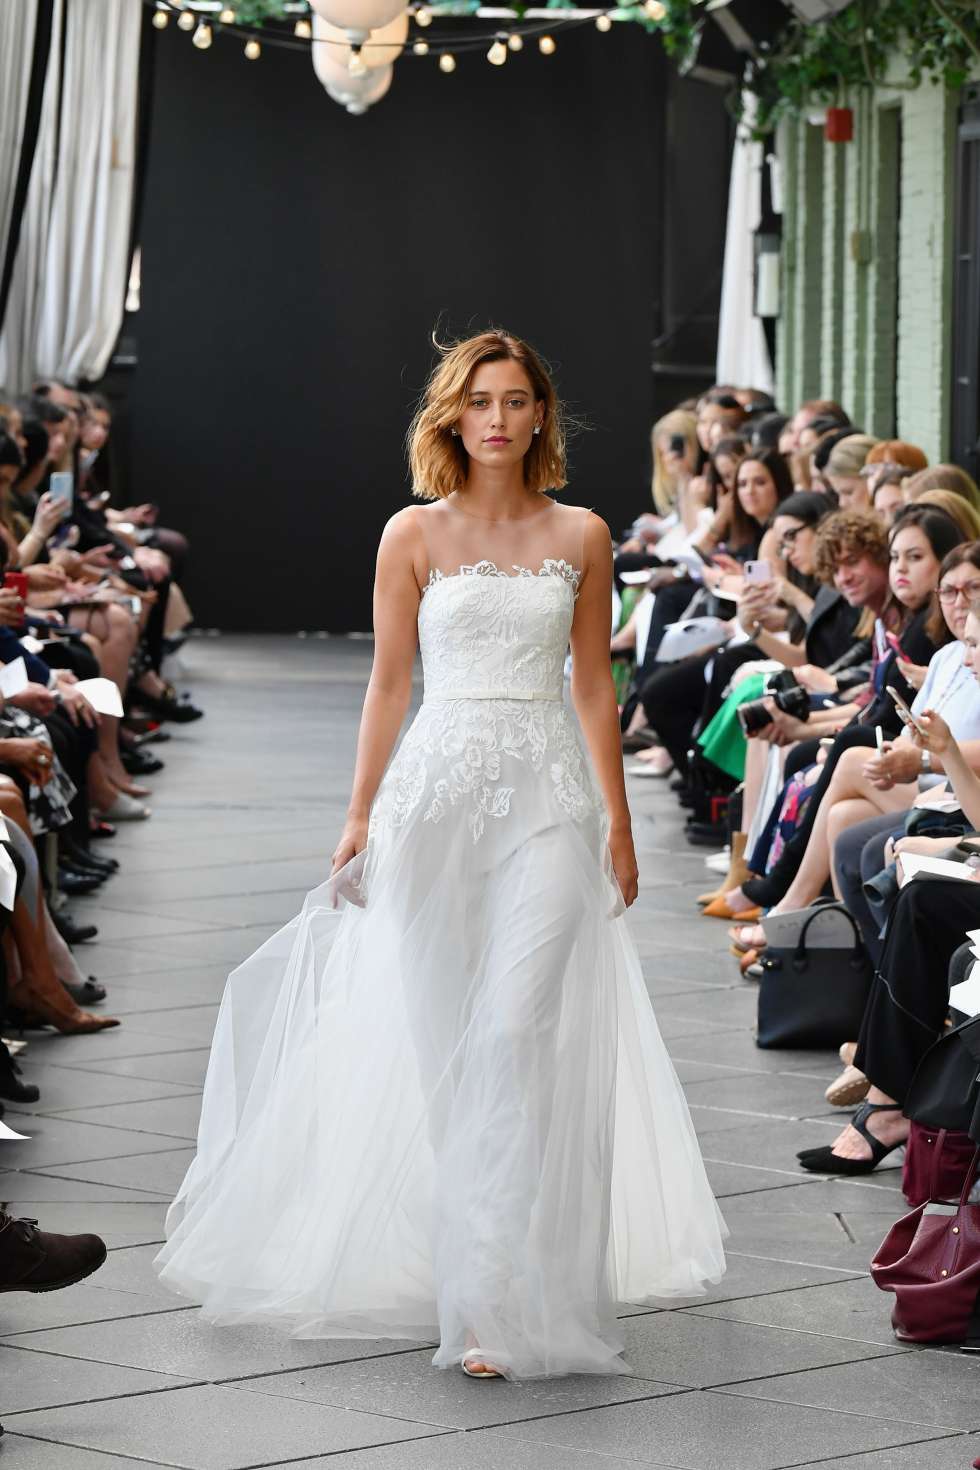 The 2019 Spring Wedding Dress Collection by Amsale